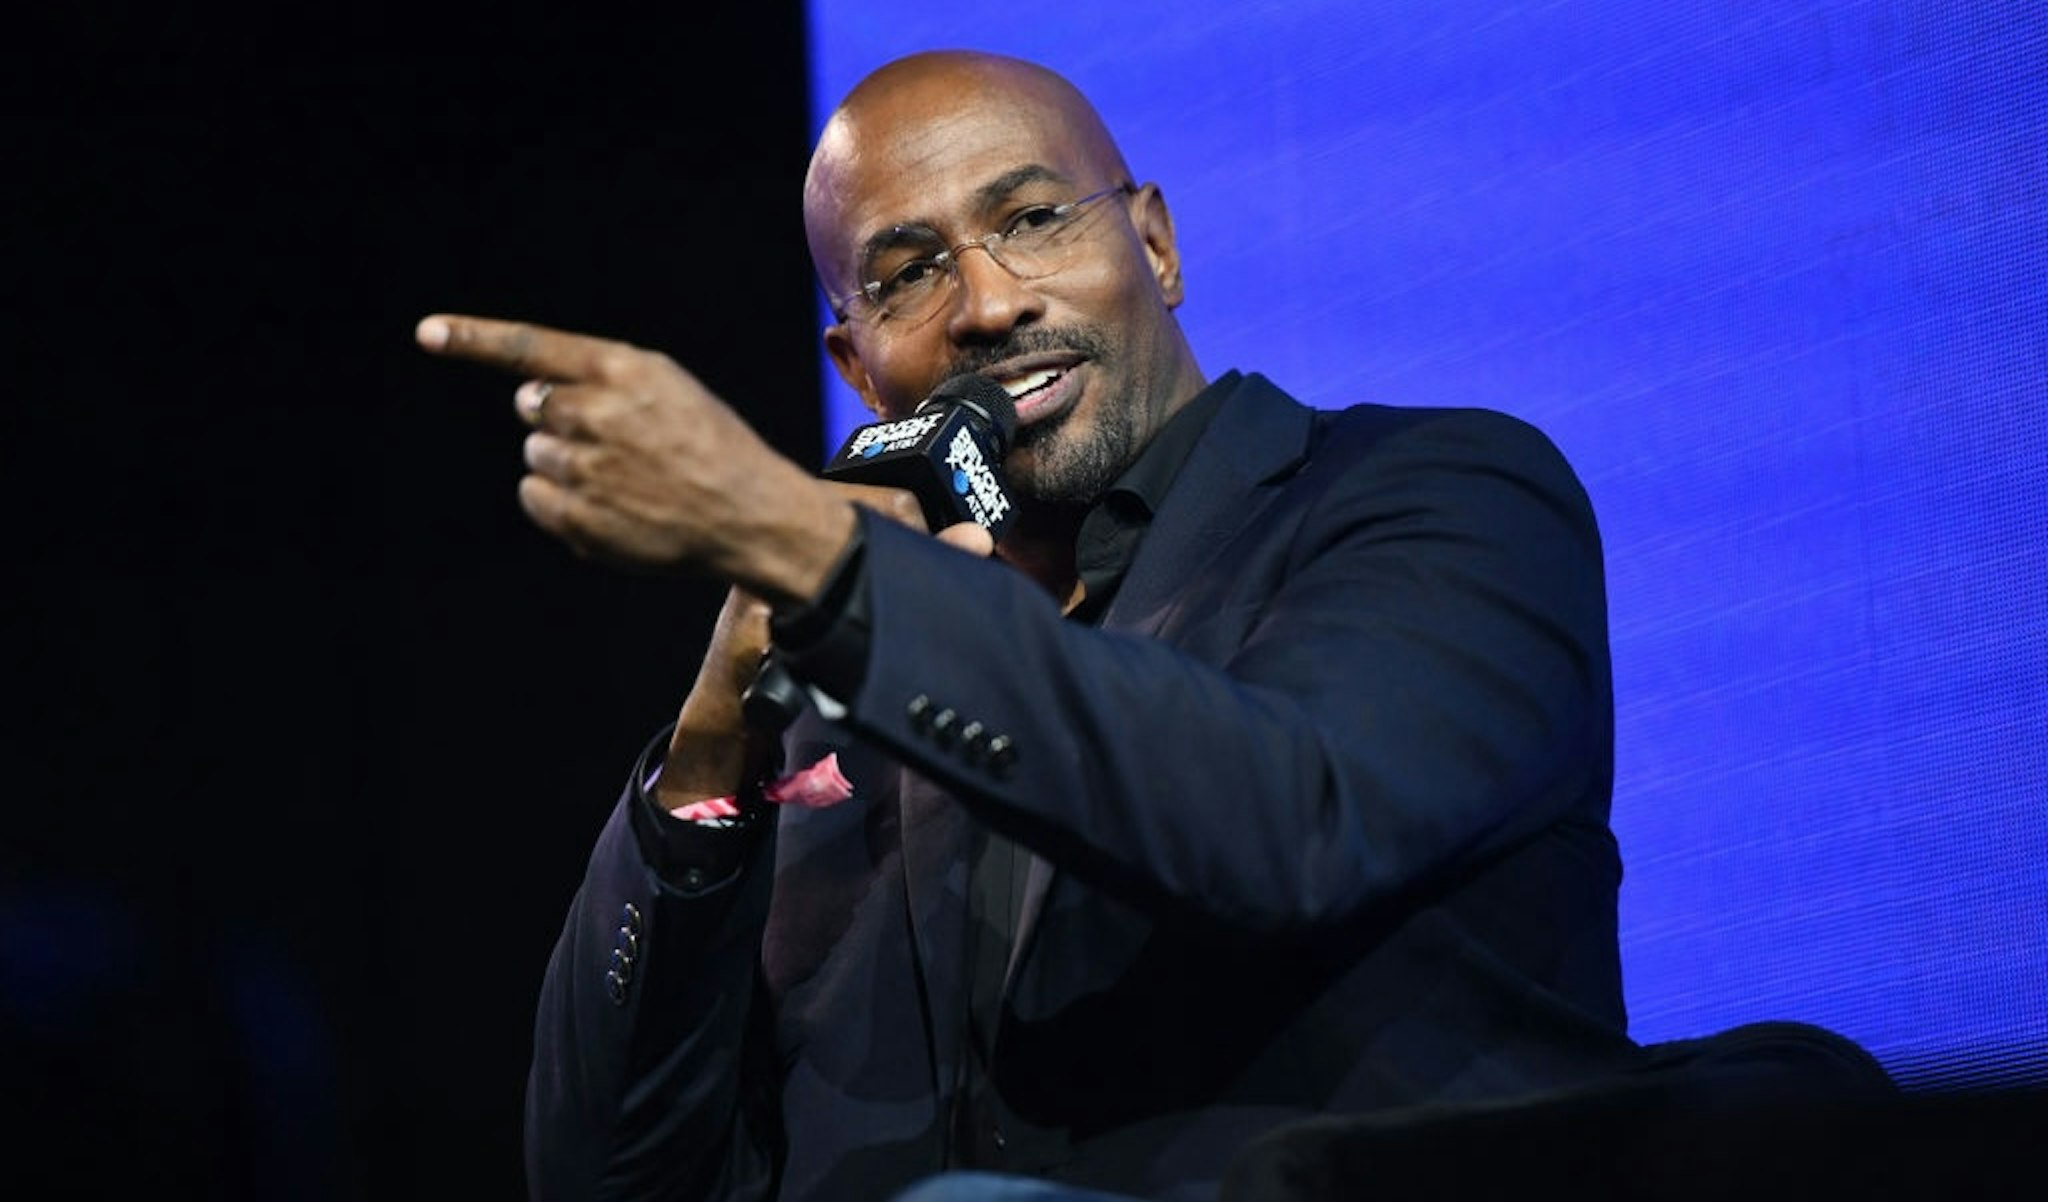 Van Jones attends the REVOLT & AT&T Summit on October 25, 2019 in Los Angeles, California. (Photo by Scott Dudelson/Getty Images)